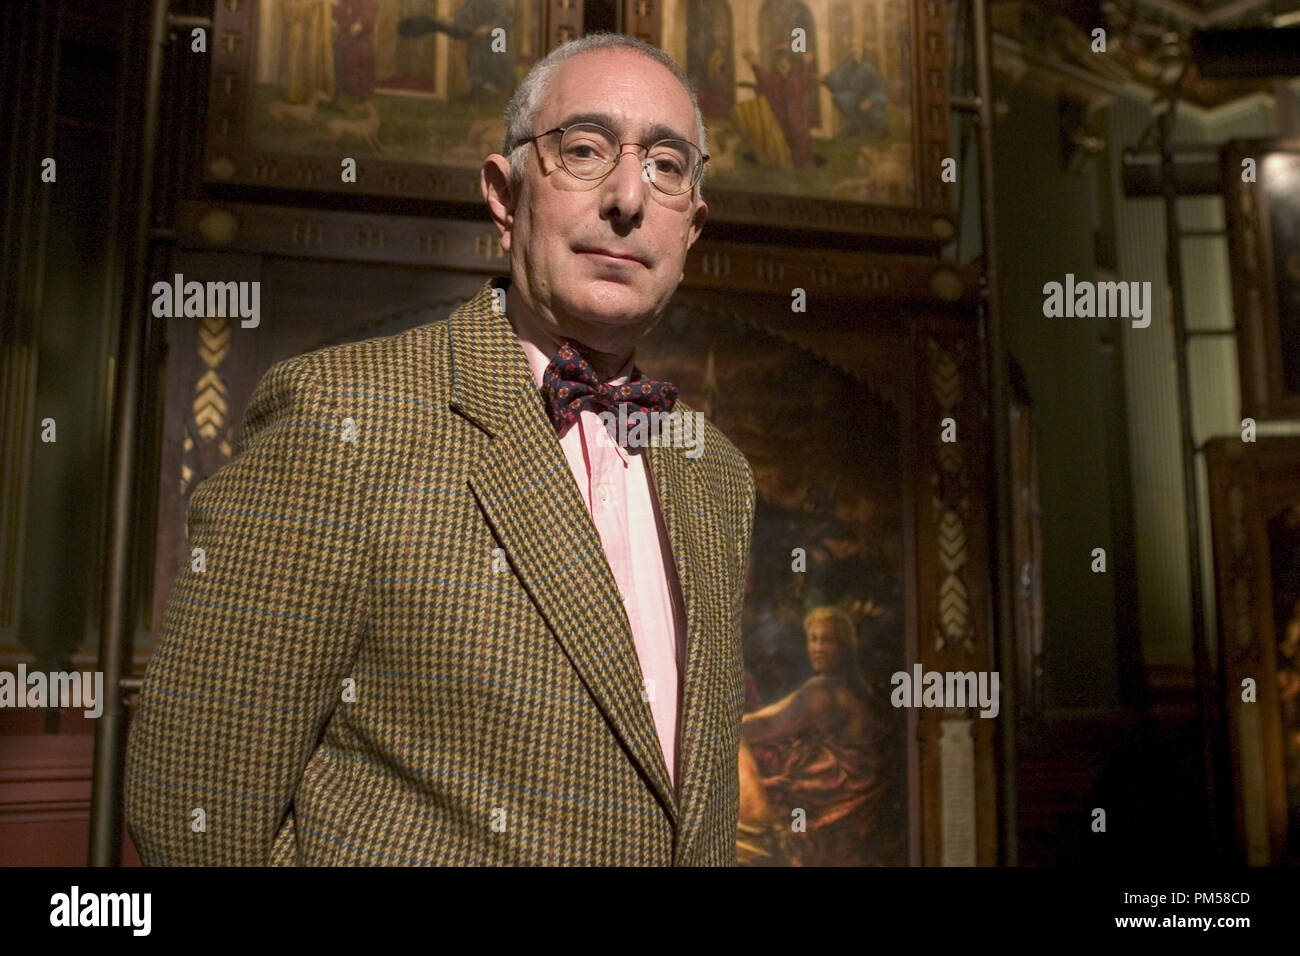 Studio Publicity Still from 'Son of the Mask' Ben Stein © 2005 New Line Productions  File Reference # 307361660THA  For Editorial Use Only -  All Rights Reserved Stock Photo